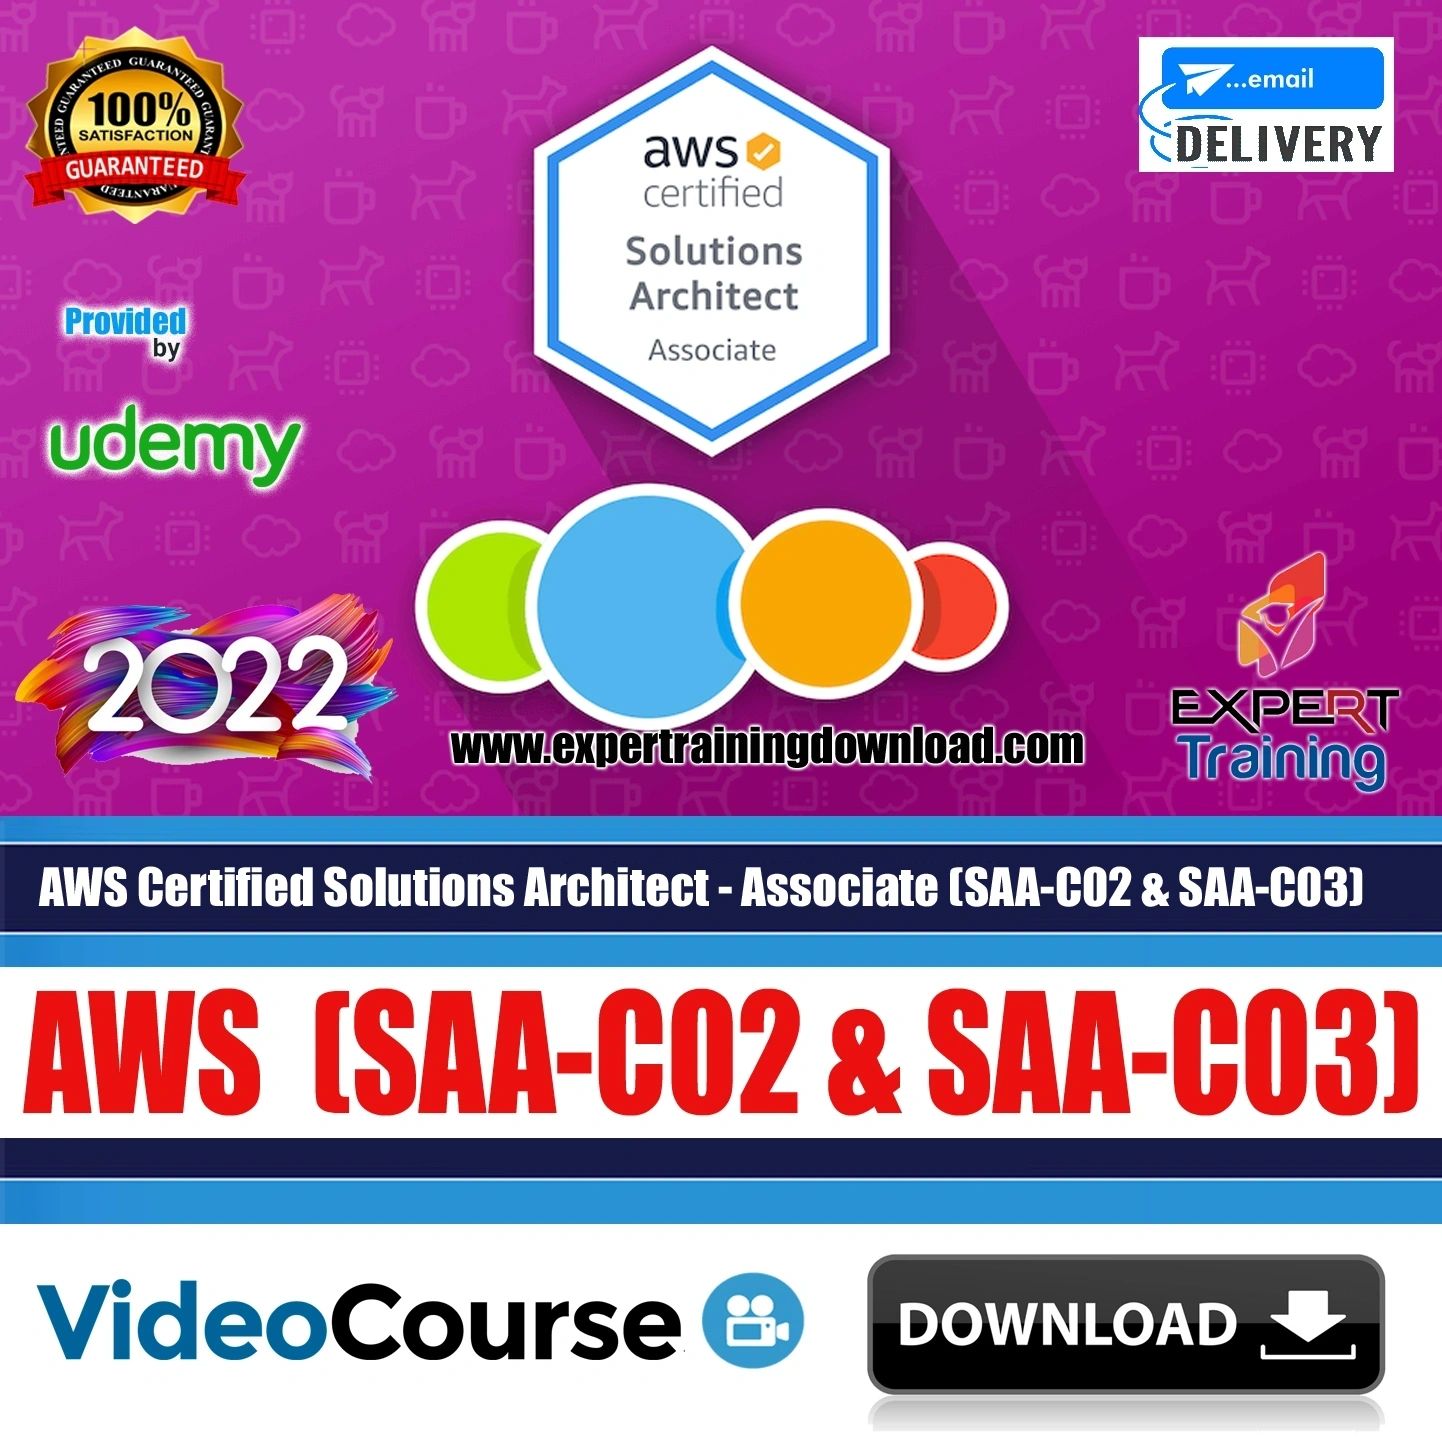 AWS Certified Solutions Architect – Associate (SAA-C03) 25+ Hours Course & PDF Guides